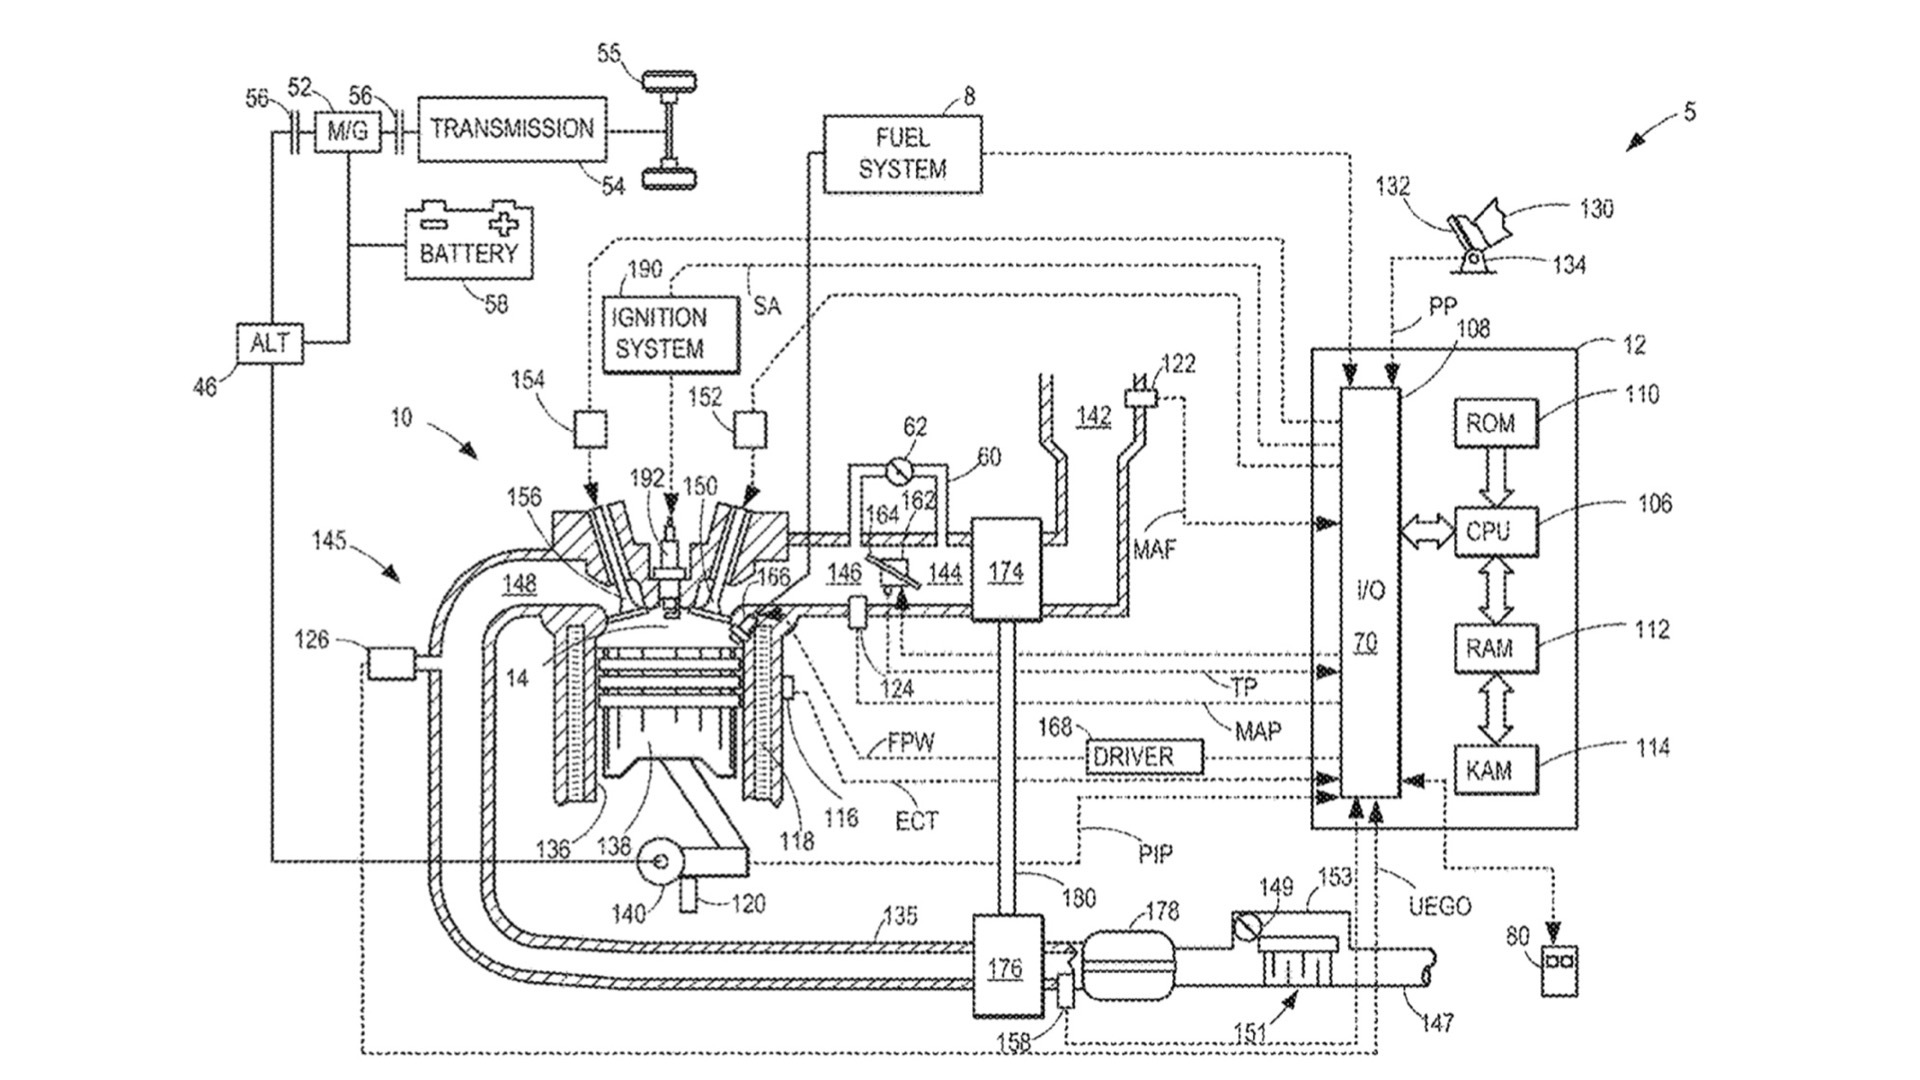 Ford remote engine revving patent image